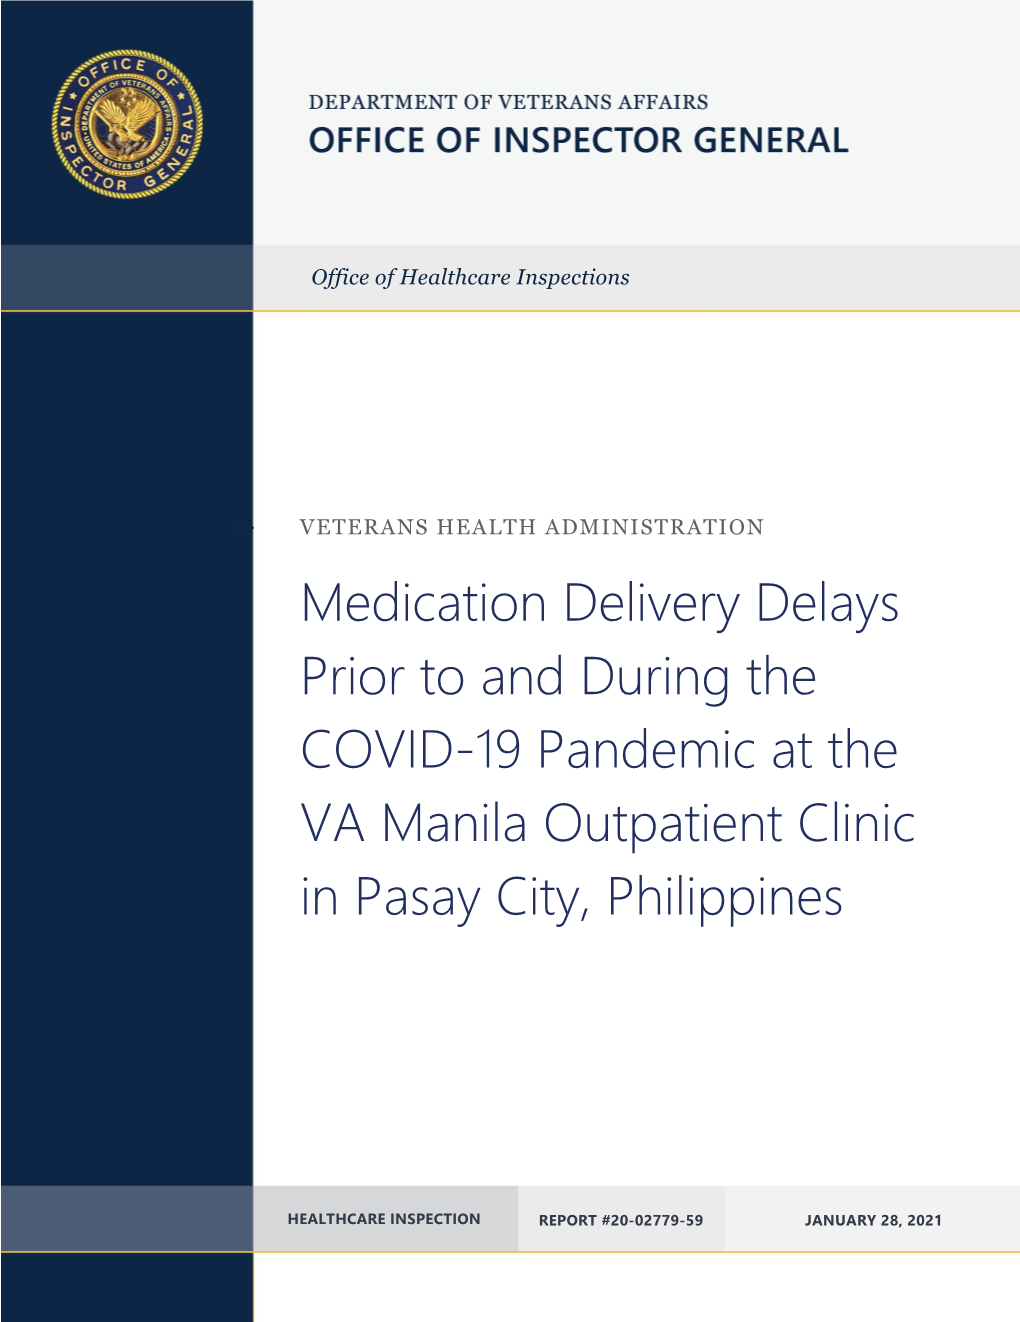 Medication Delivery Delays Prior to and During the COVID-19 Pandemic at the VA Manila Outpatient Clinic in Pasay City, Philippines